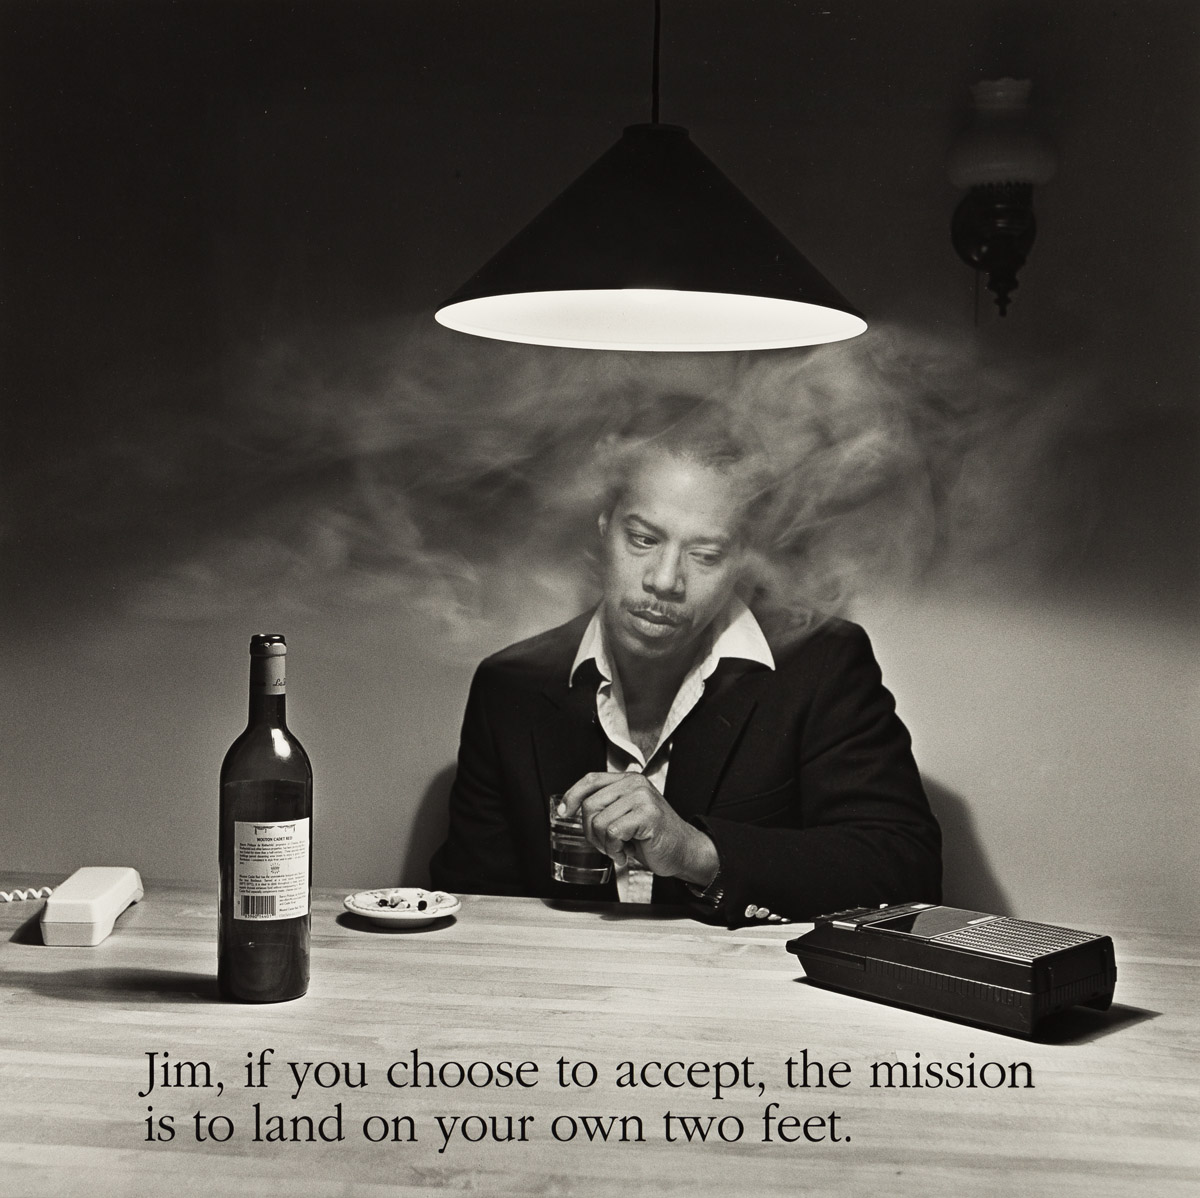 CARRIE MAE WEEMS (1953 - ) Jim, if you choose to accept, the mission is to land on your own two feet.